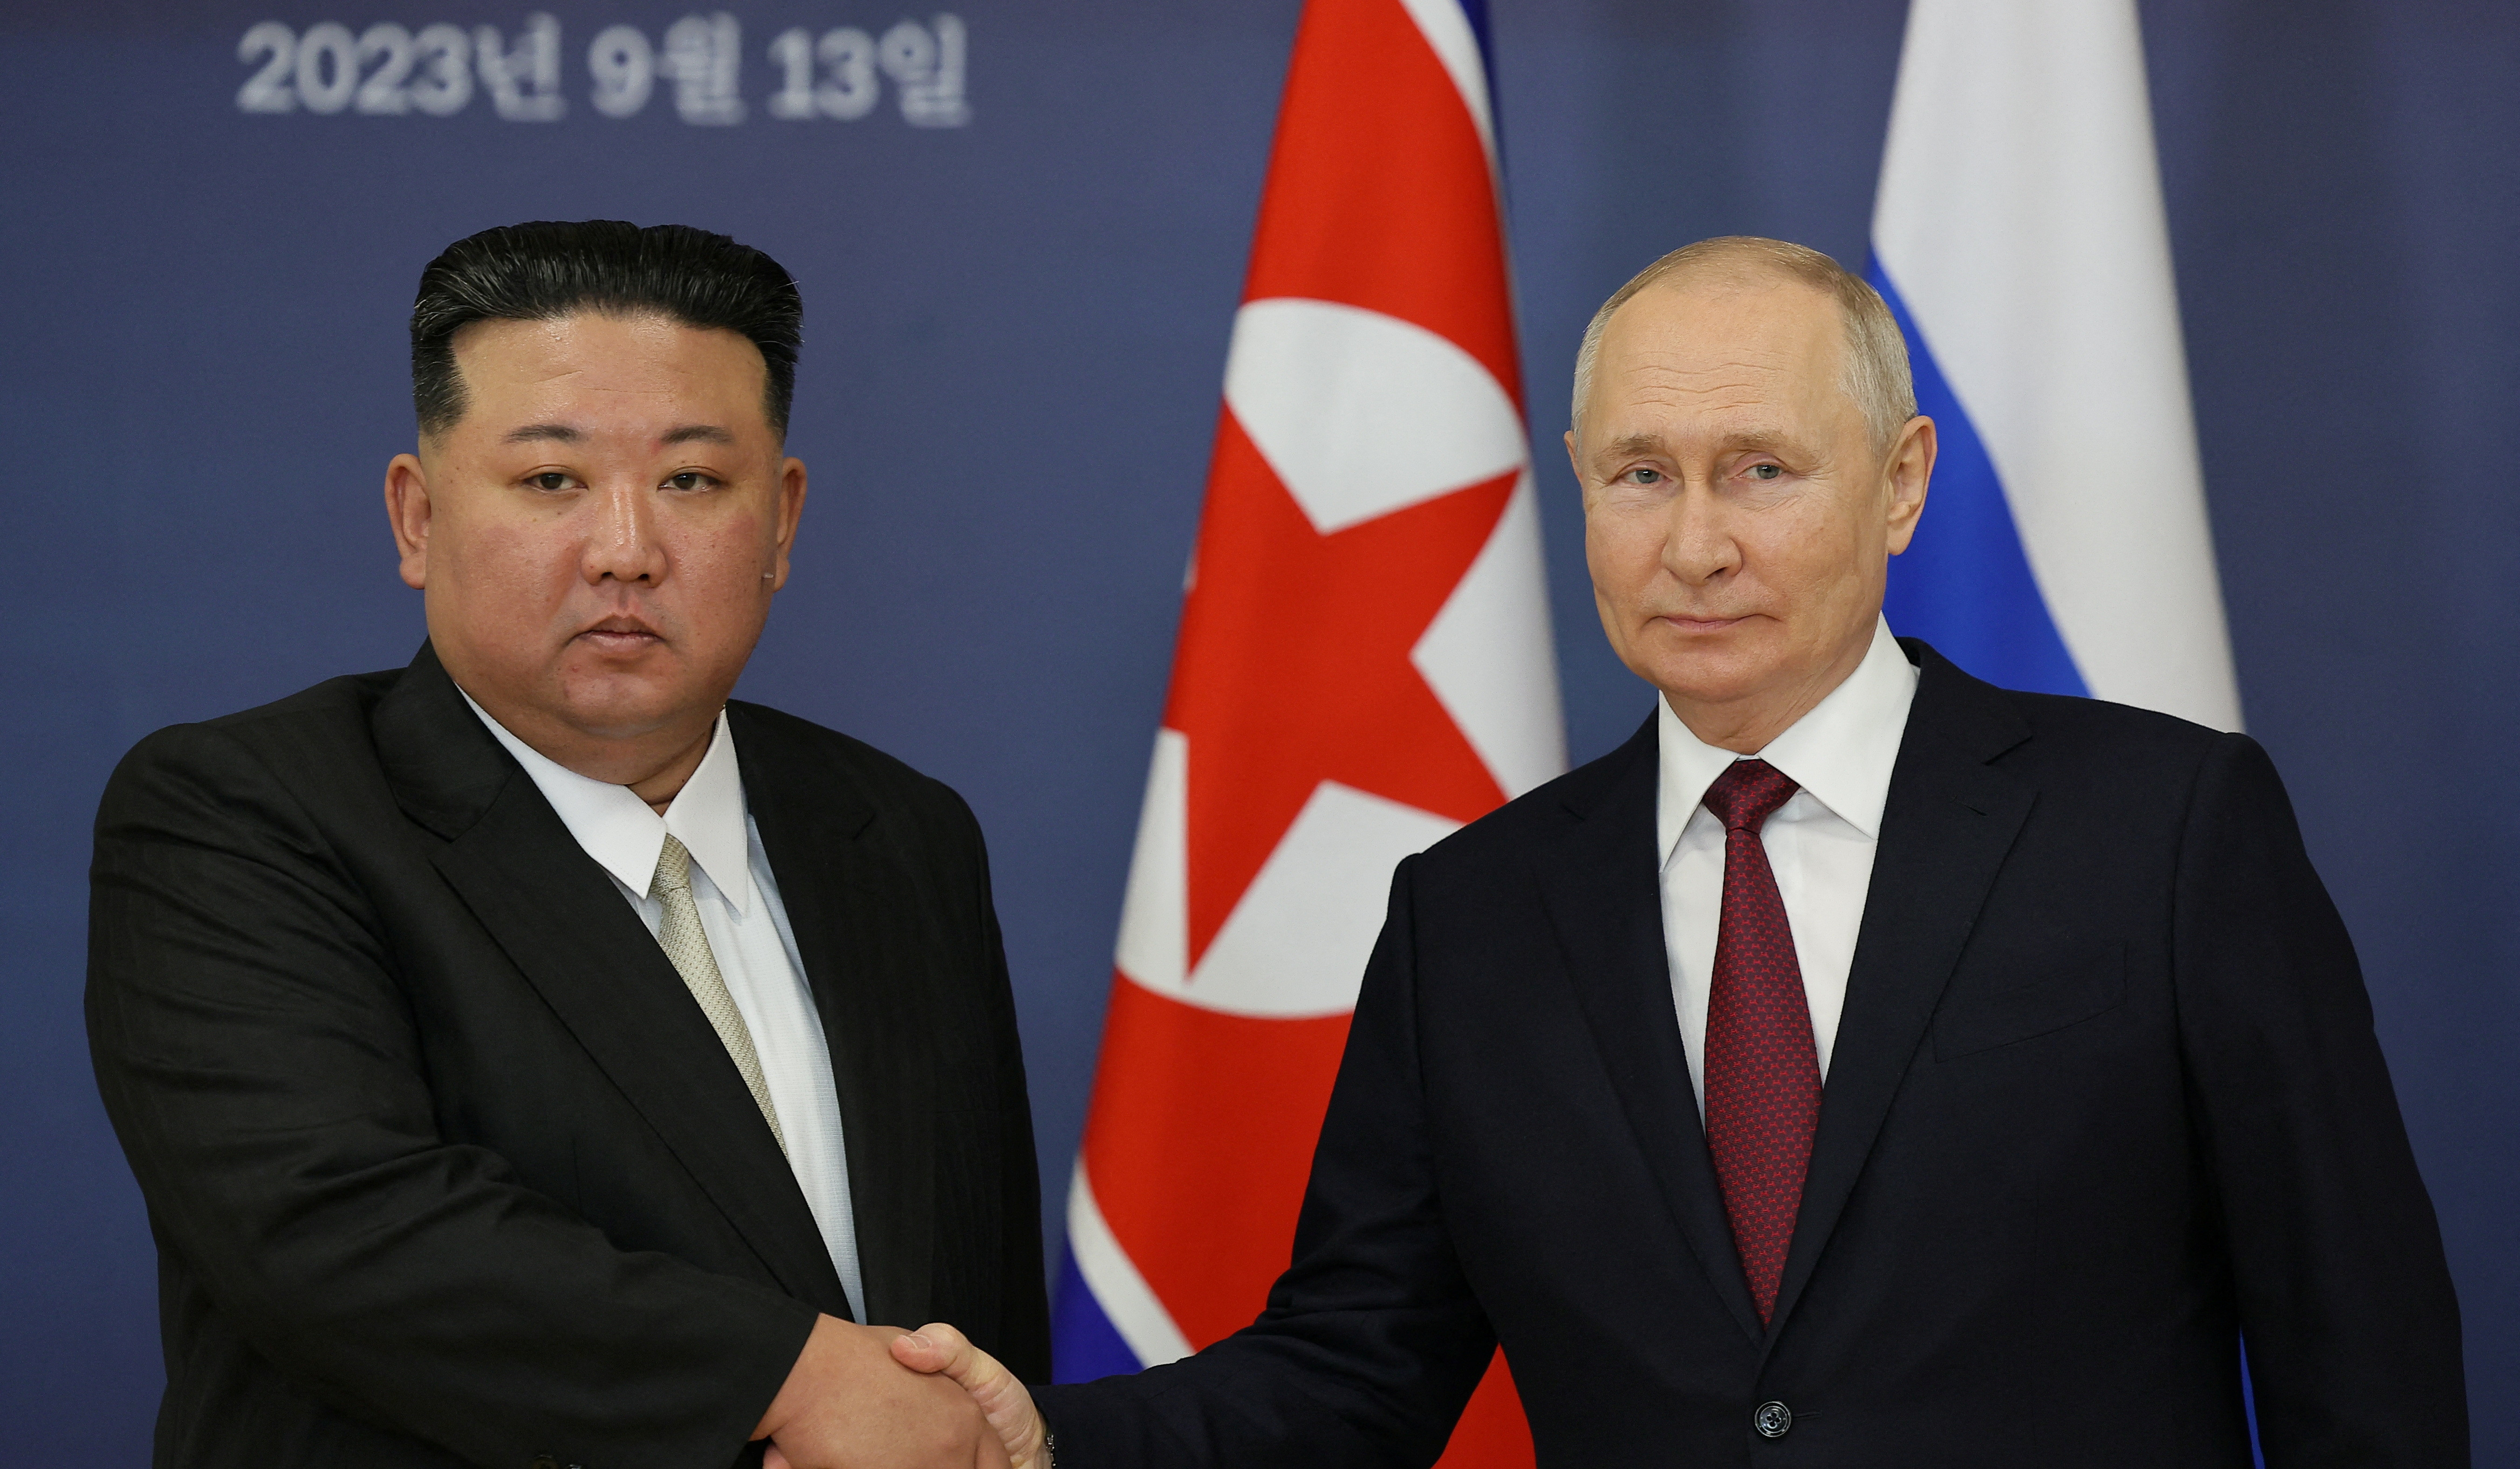 Russia, North Korea have many joint projects, including in transport sector: Putin